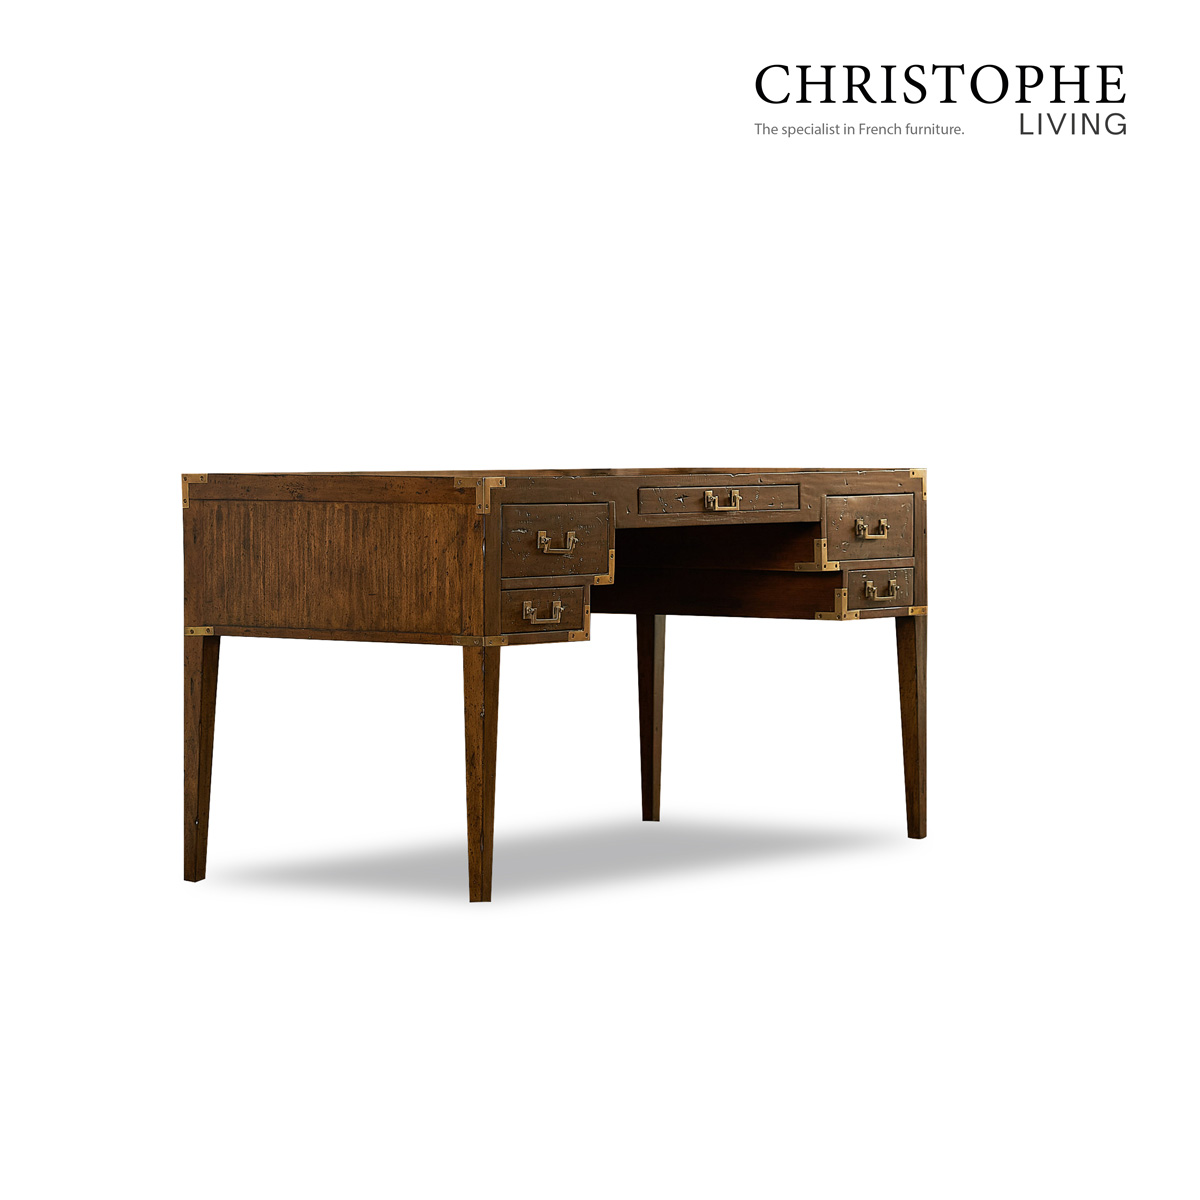 Holland French Provincial Study Desk in Warm Natural Timber with Solid Brass Hardware and 5 Drawers